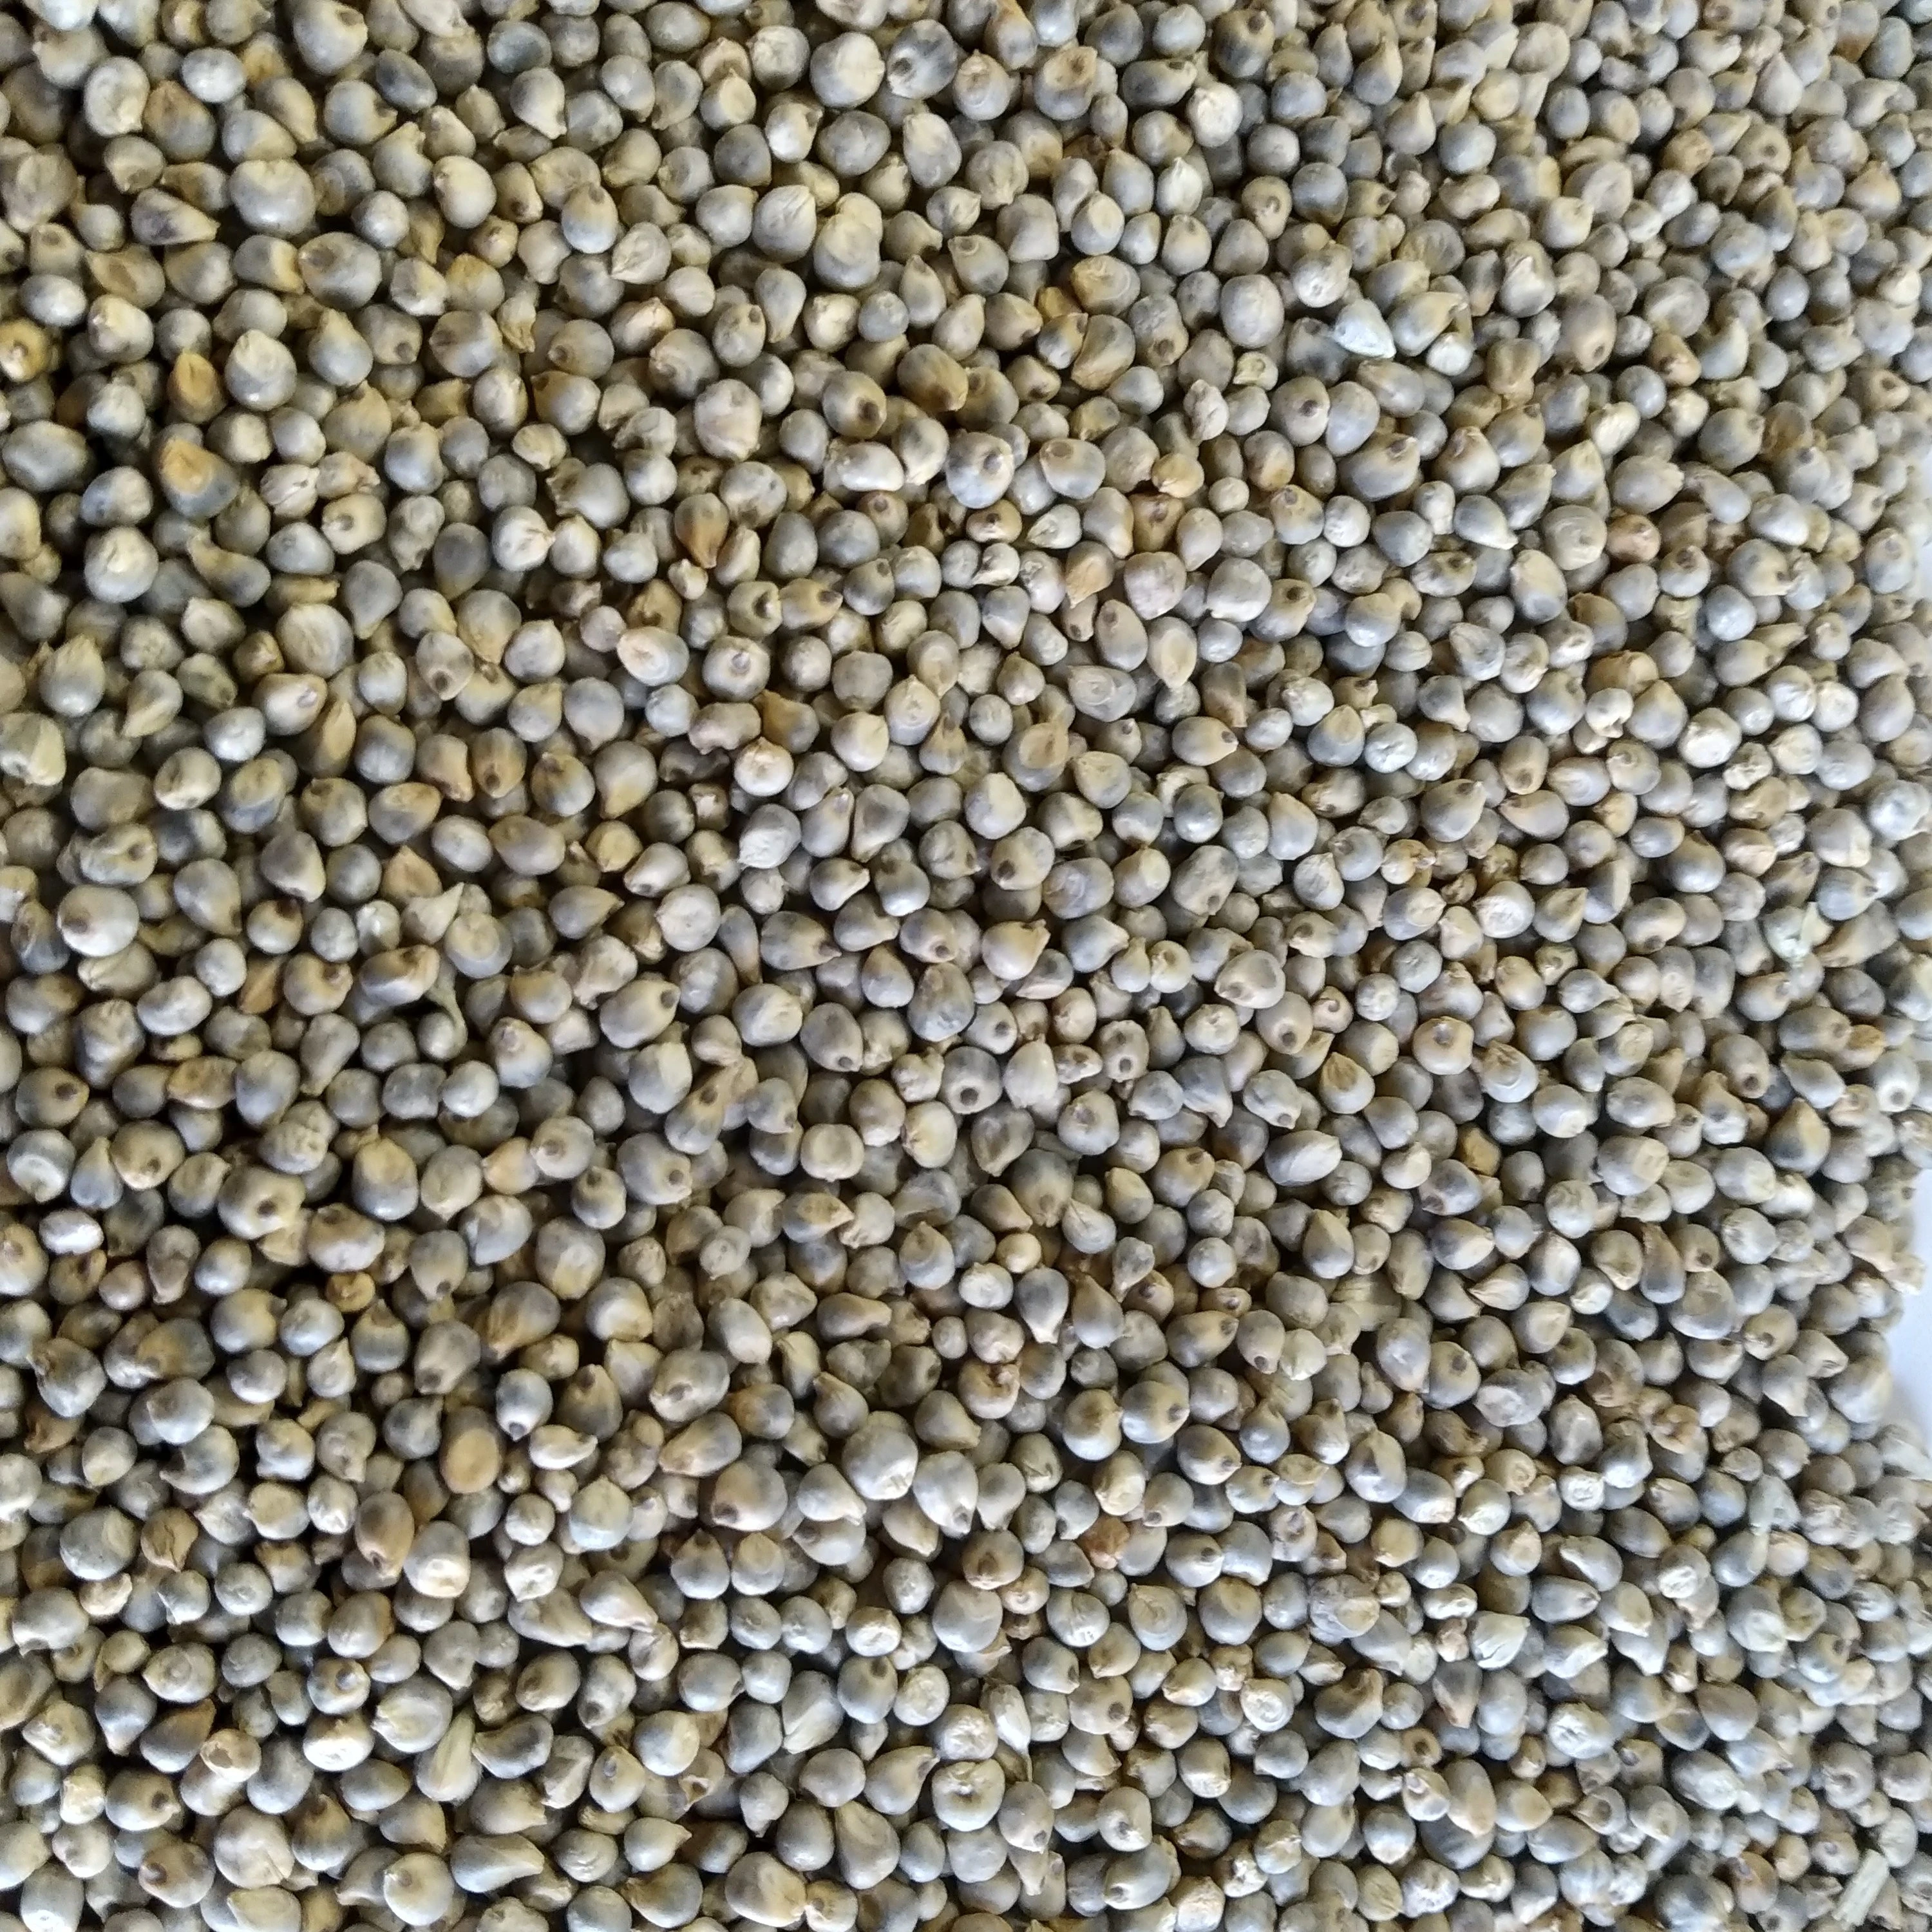 Indian Green Millet/Bajra by Verified Supplier